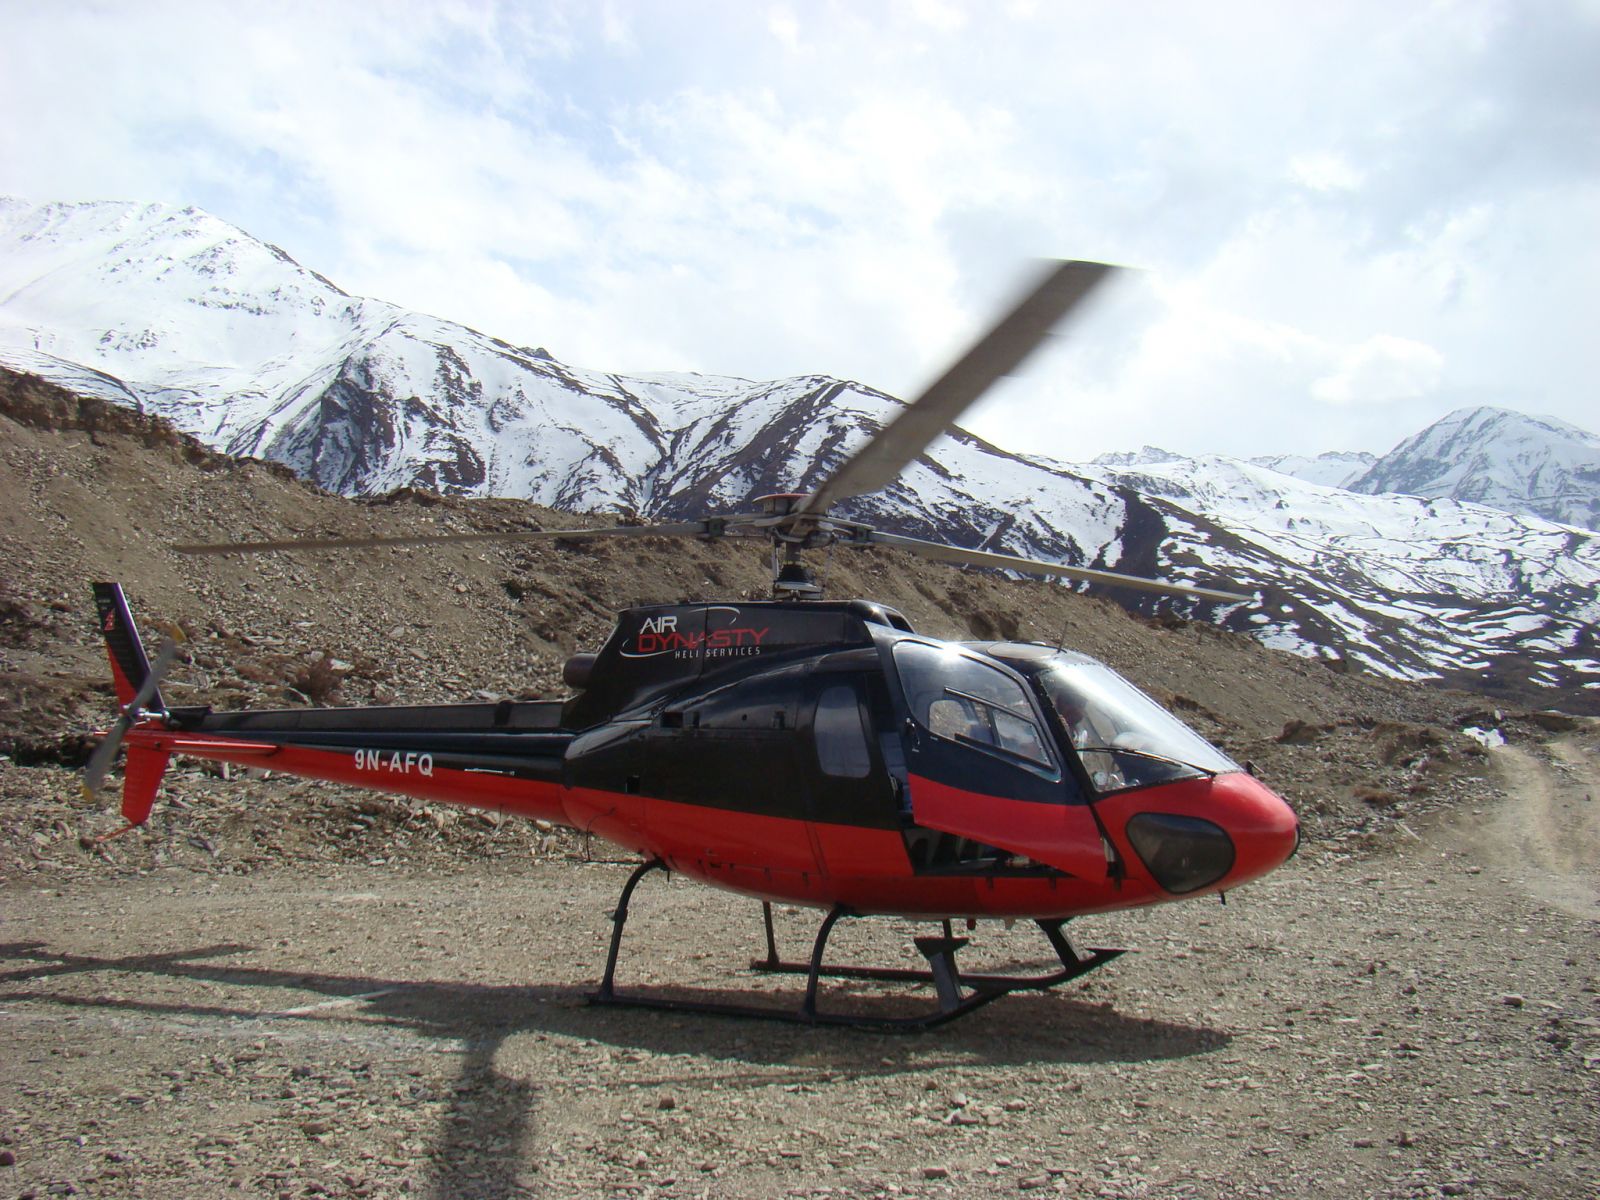 Annapurna Helicopter Tour takes you to the Annapurna Base Camp